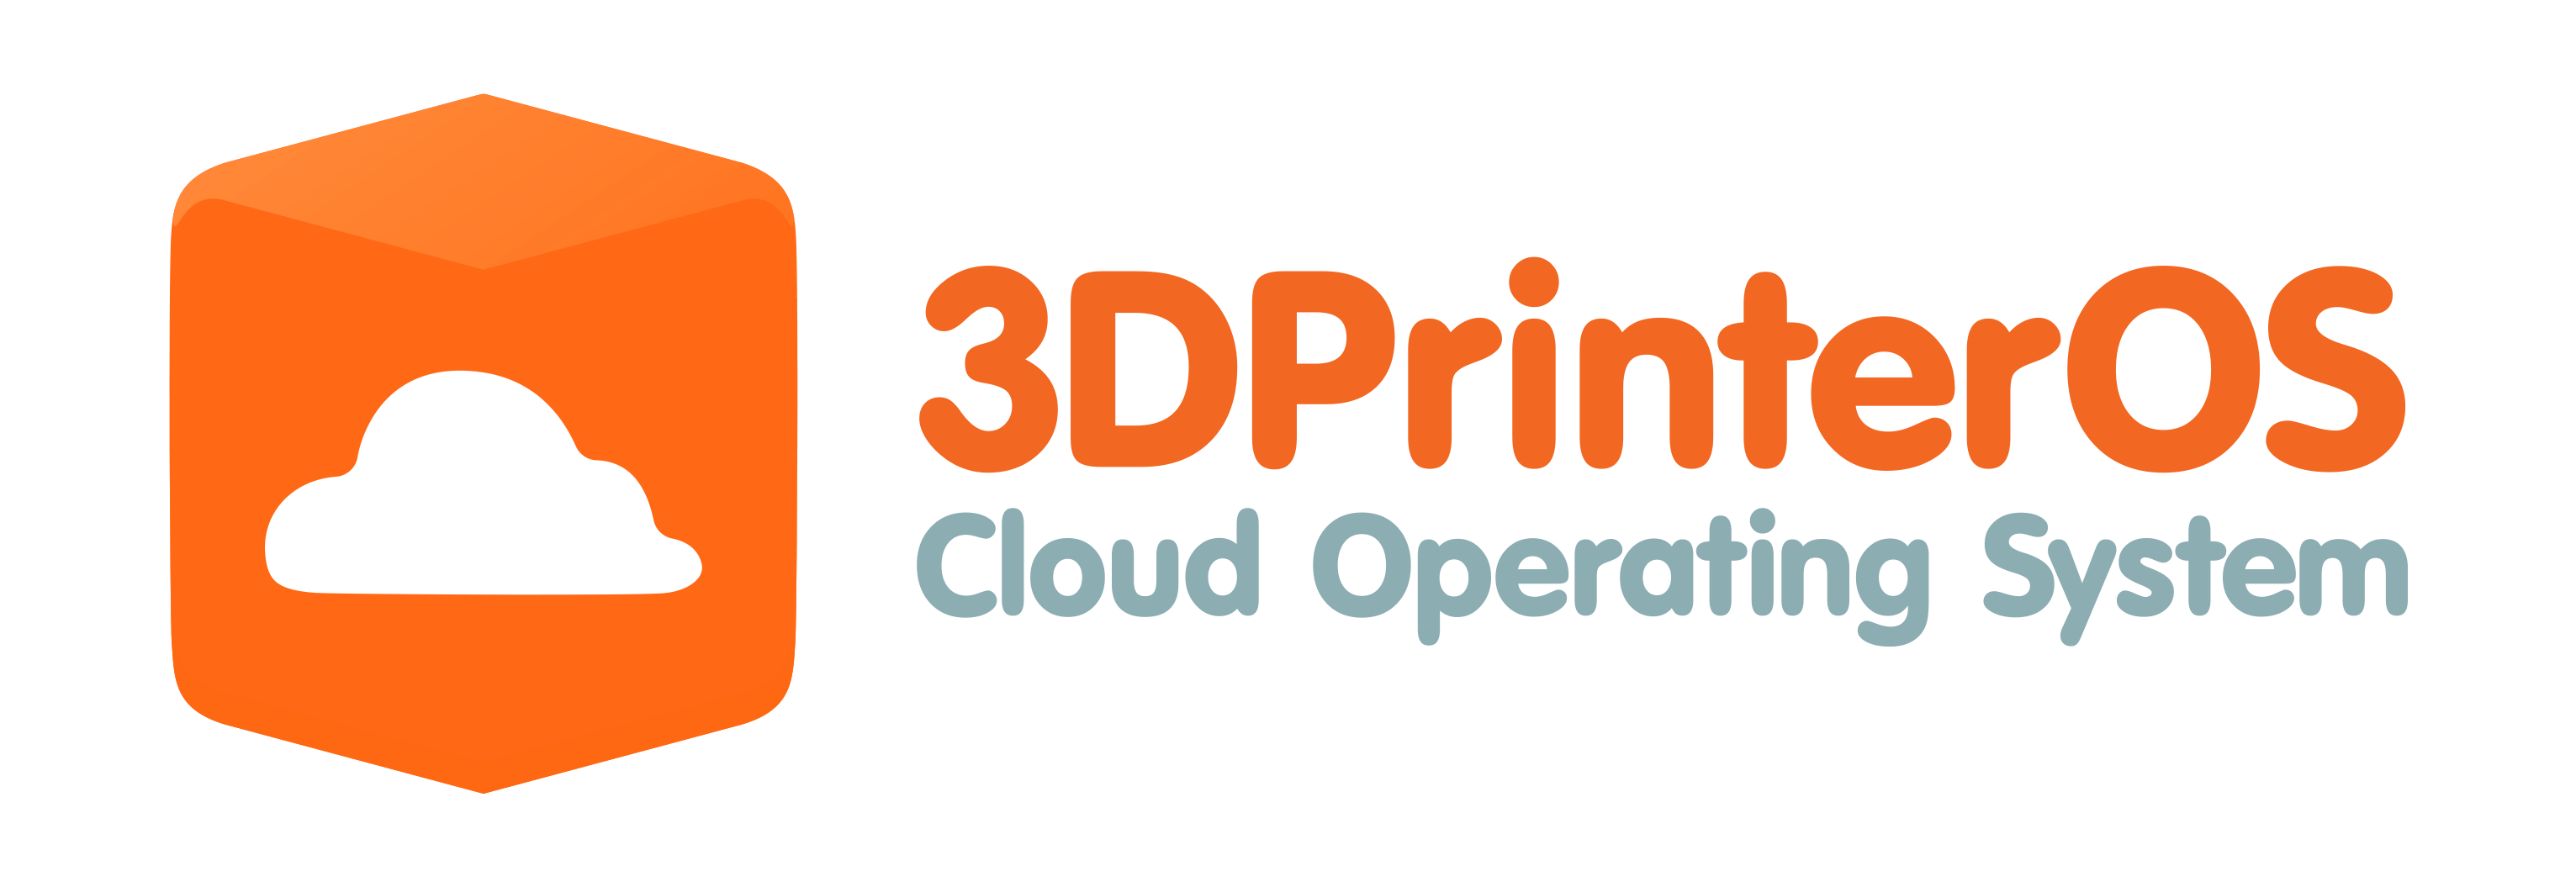 3D Printing Operating System - Secured3D